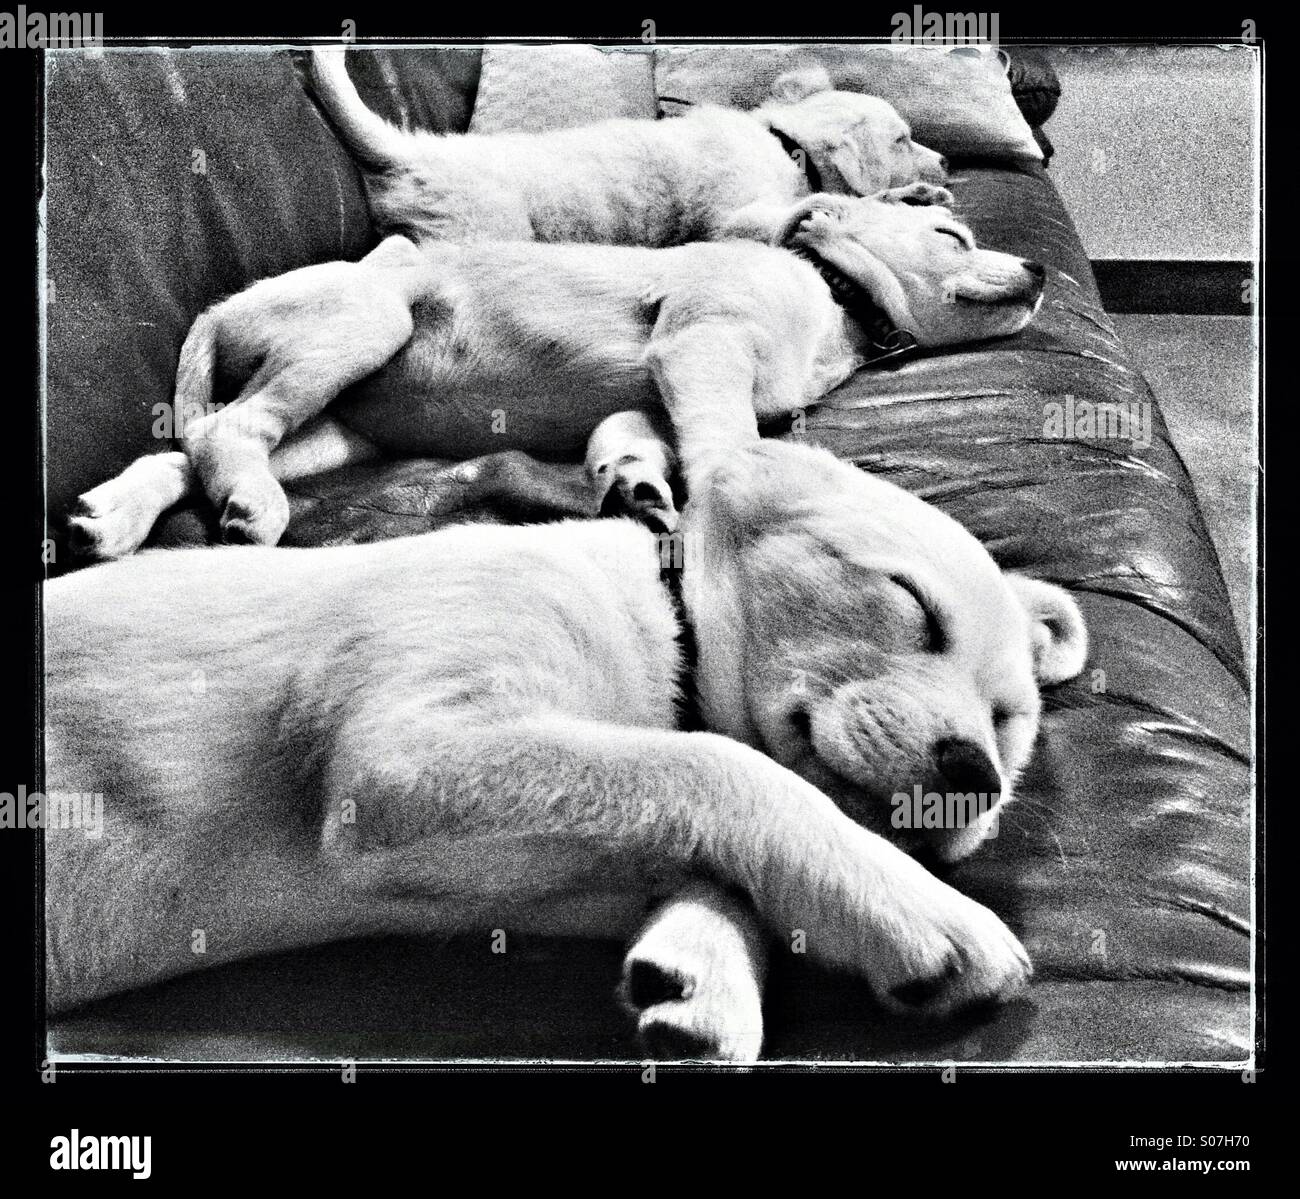 Tuckered out puppies at nap time. Stock Photo